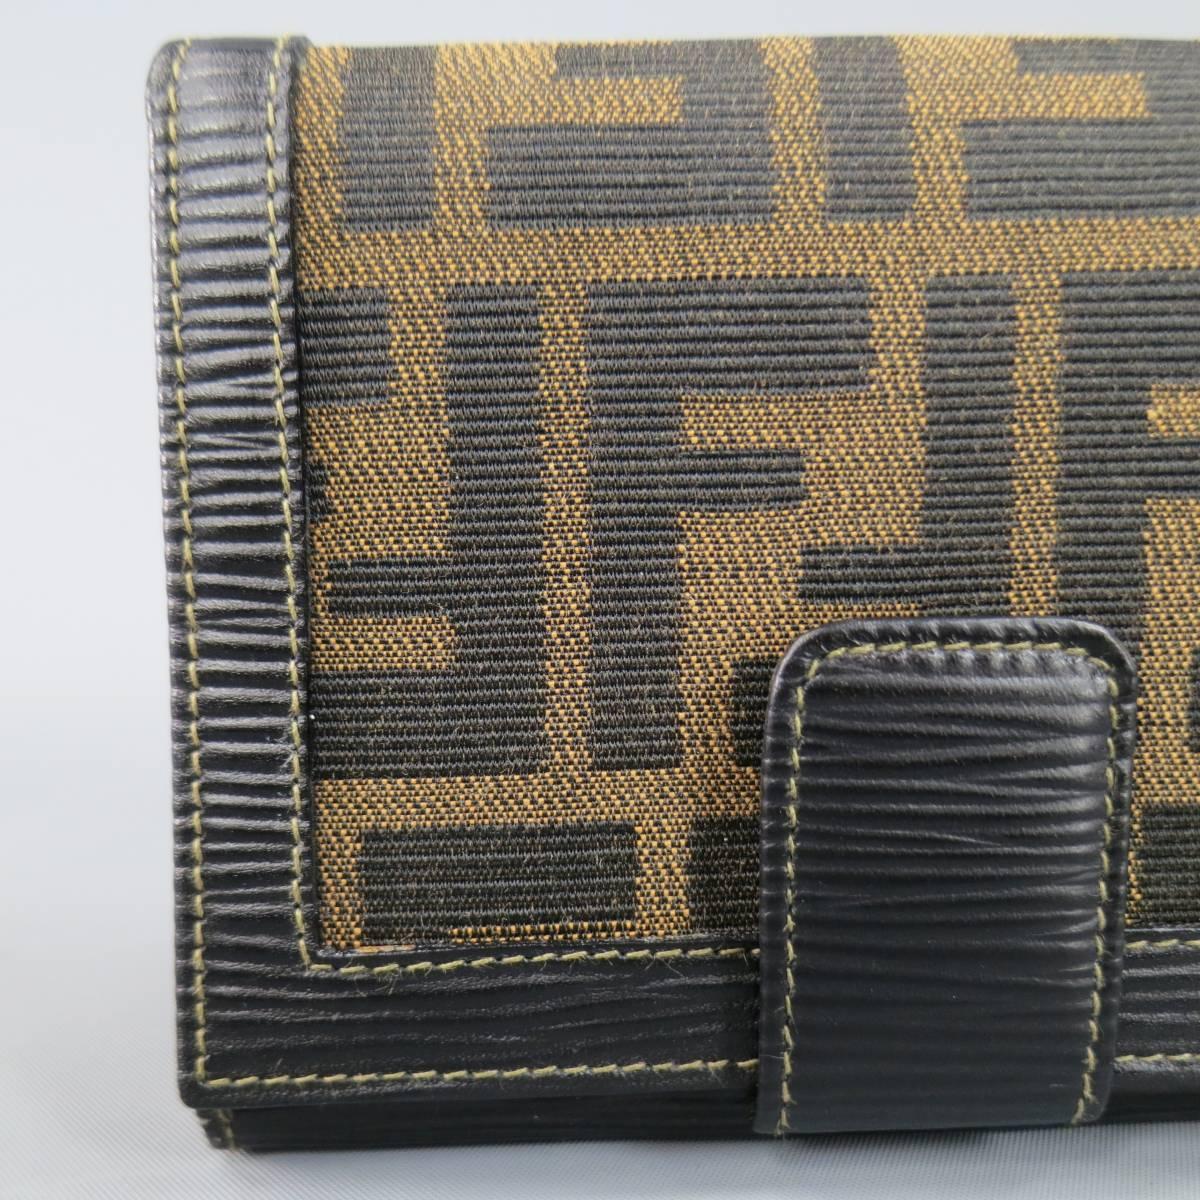 Vintage FENDI wallet in signature tan and brown FF monogram canvas with black epi textured leather details featuring a snap closure, leather interior with contrast stitching, and snap pouch. Made in Italy.
 
New without Tags.
 
Length: 5